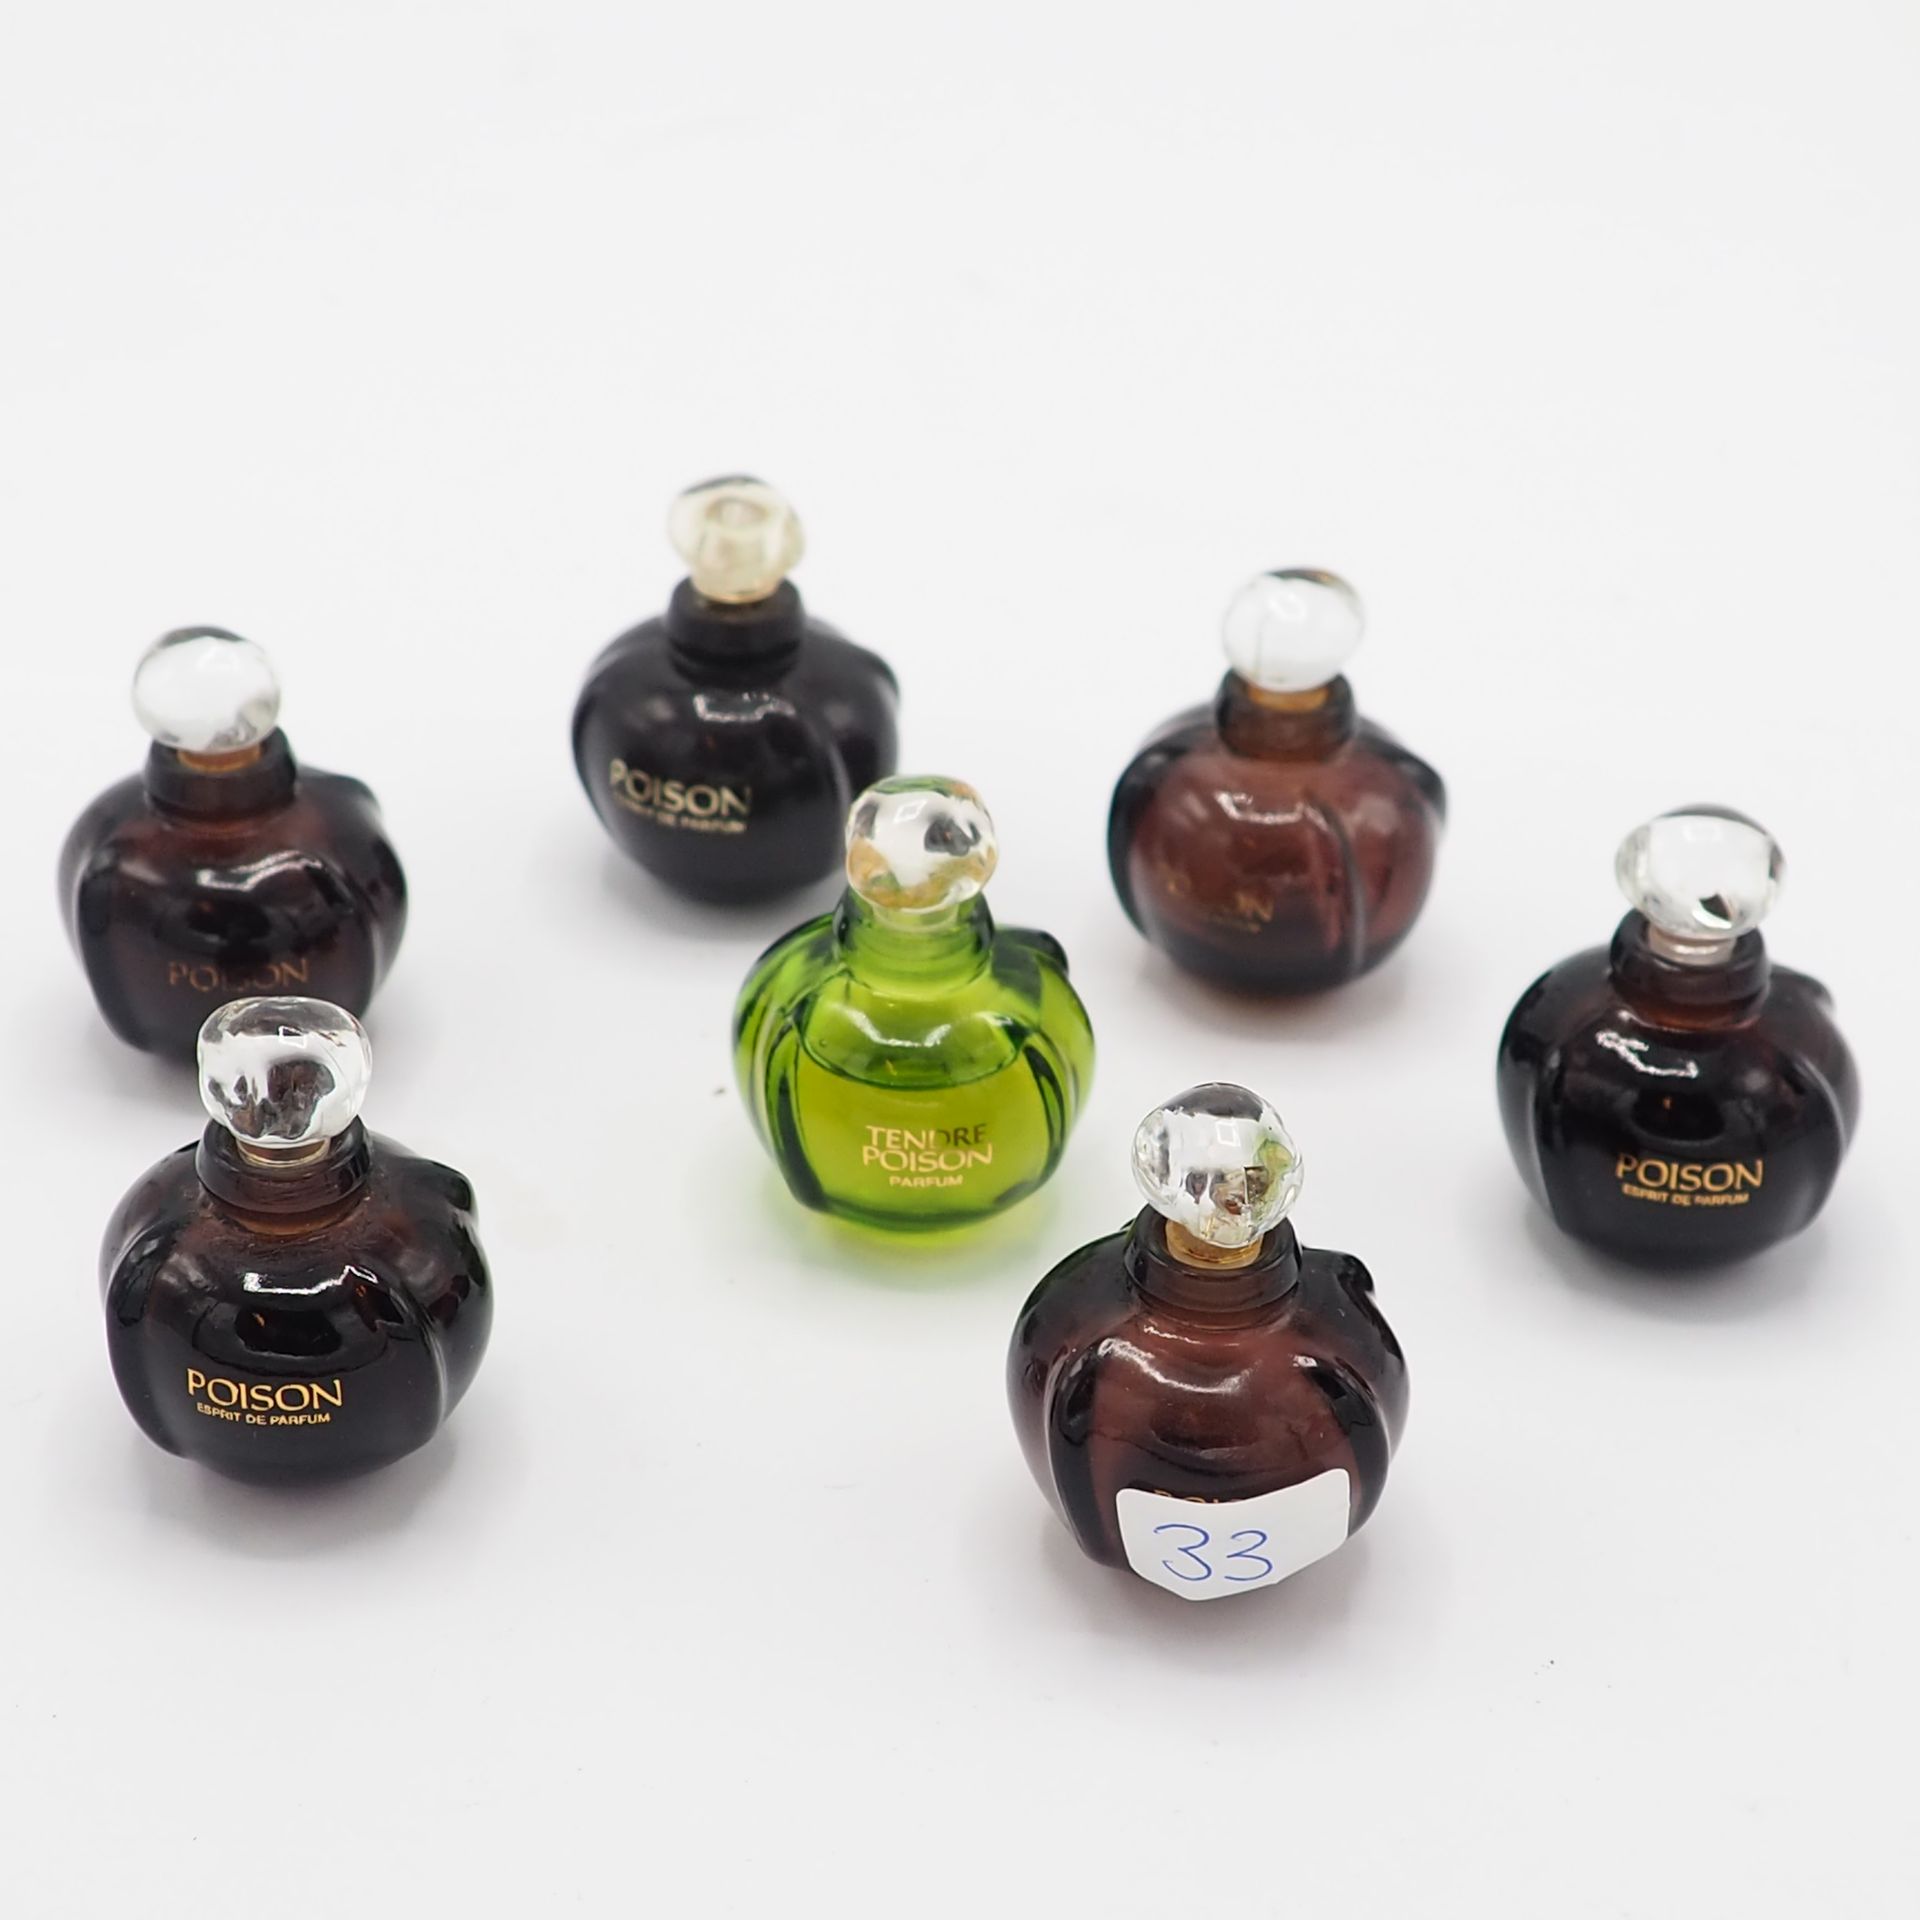 CHRISTIAN DIOR Christian Dior : Lot of 7 miniatures of poison spirit of perfume